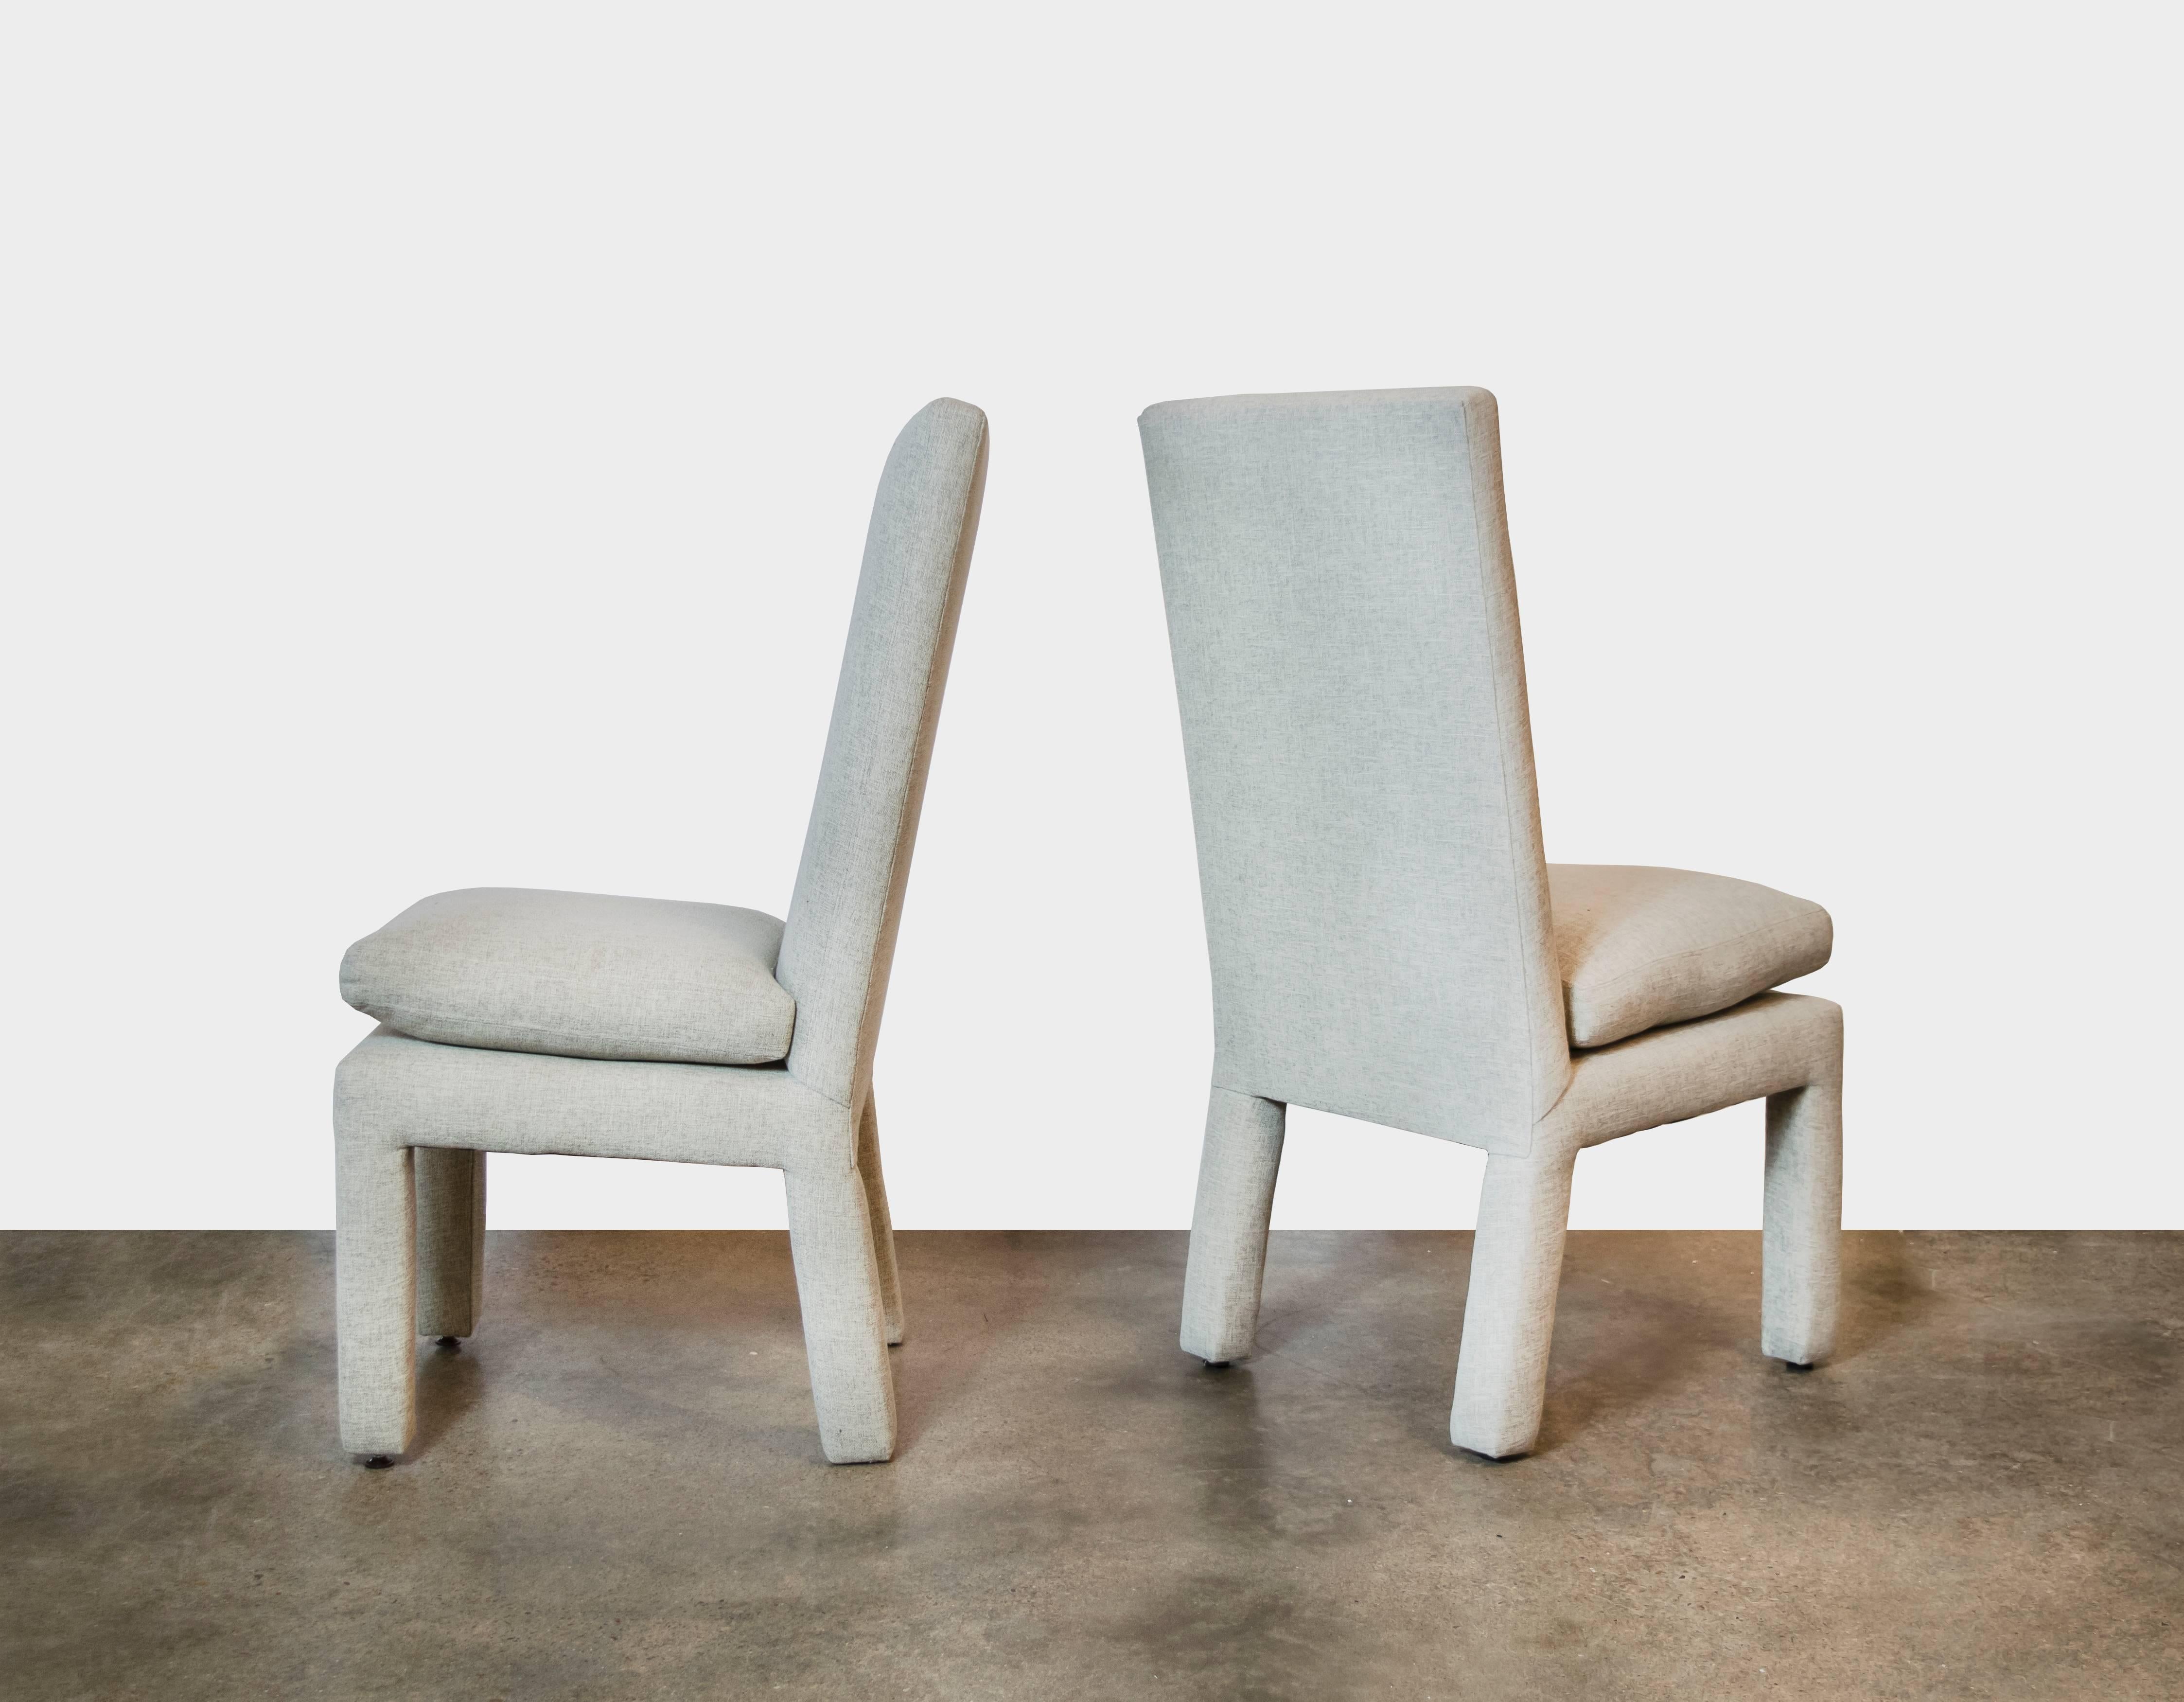 Set of six Classic Milo Baughman dining chairs, recently upholstered in an oatmeal linen wool blend. Exceptionally comfortable because of the high back and cushioned seating.